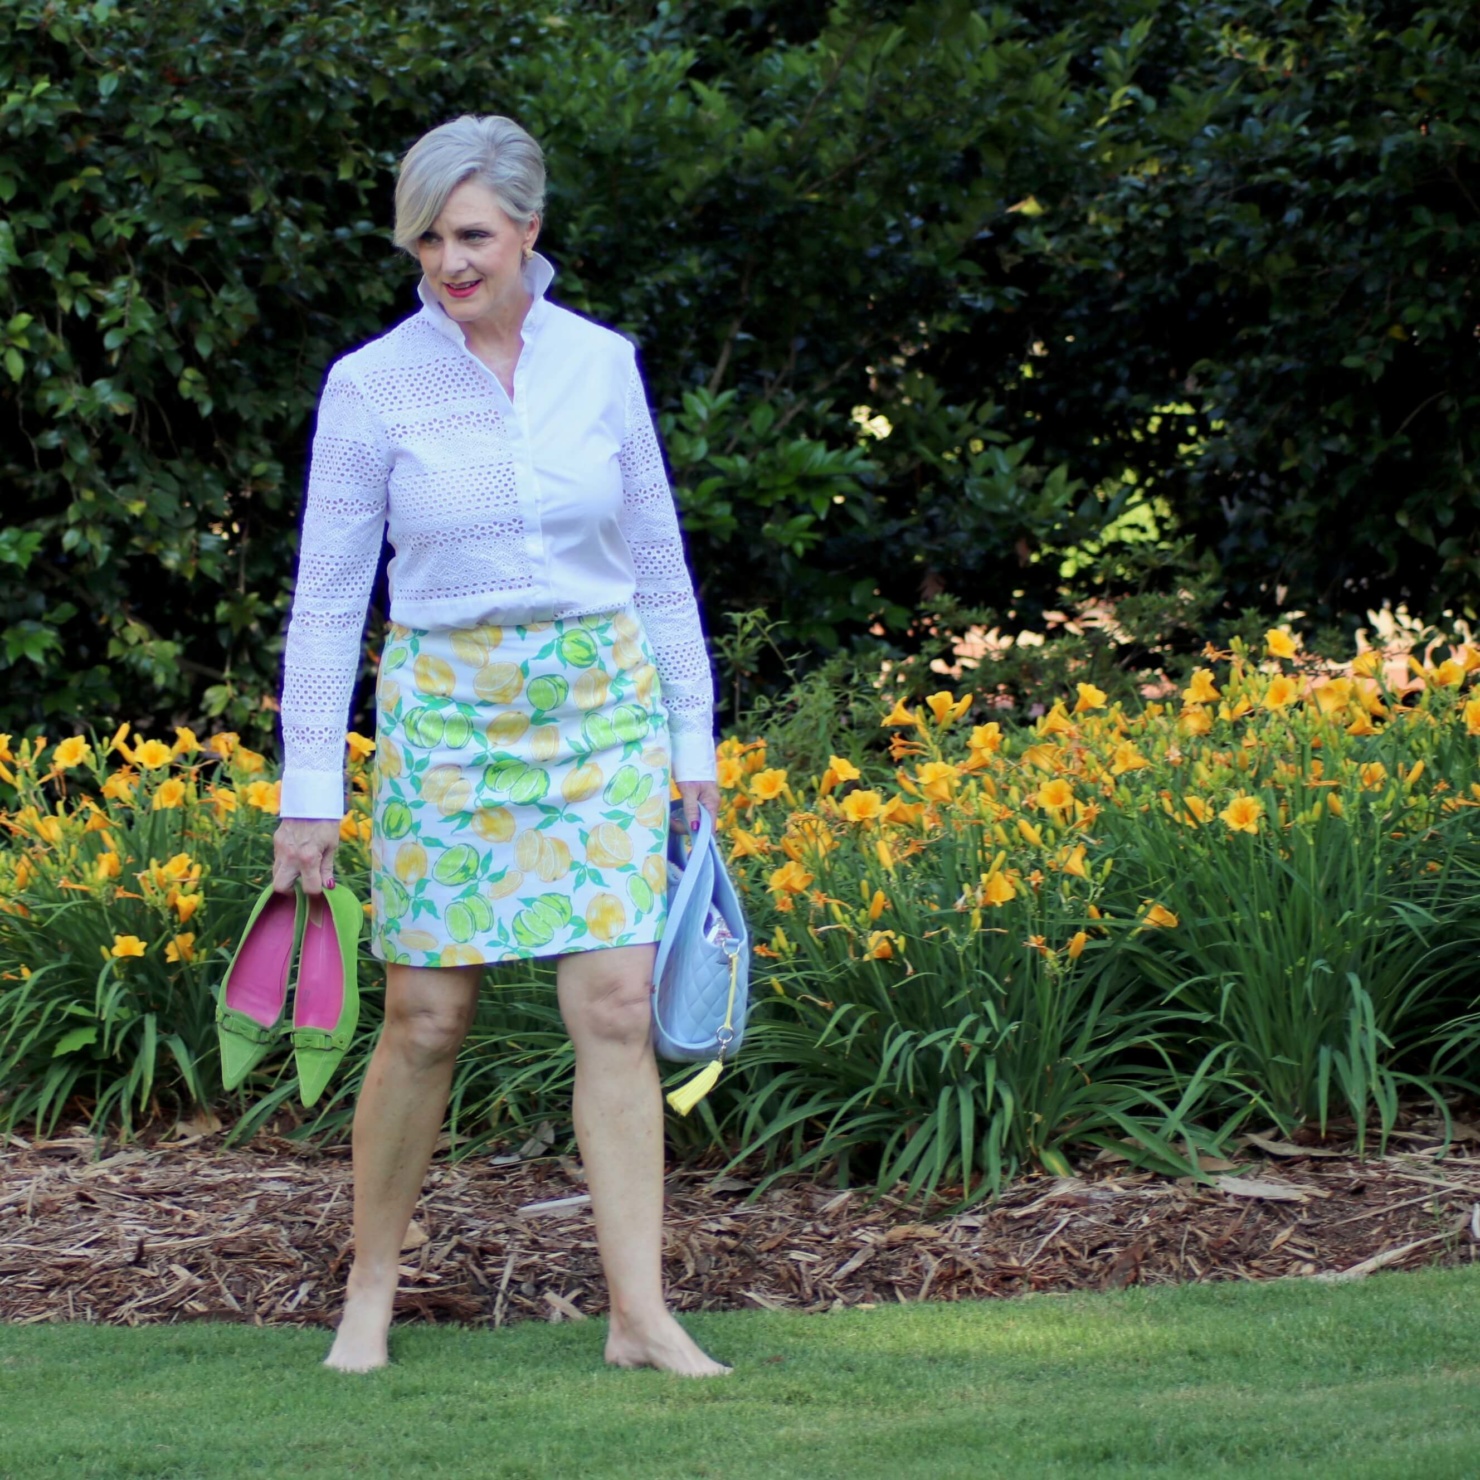 beth from Style at a Certain Age wears a lemon print skirt, eyelet blouse, pointy-toed flats and o-bag